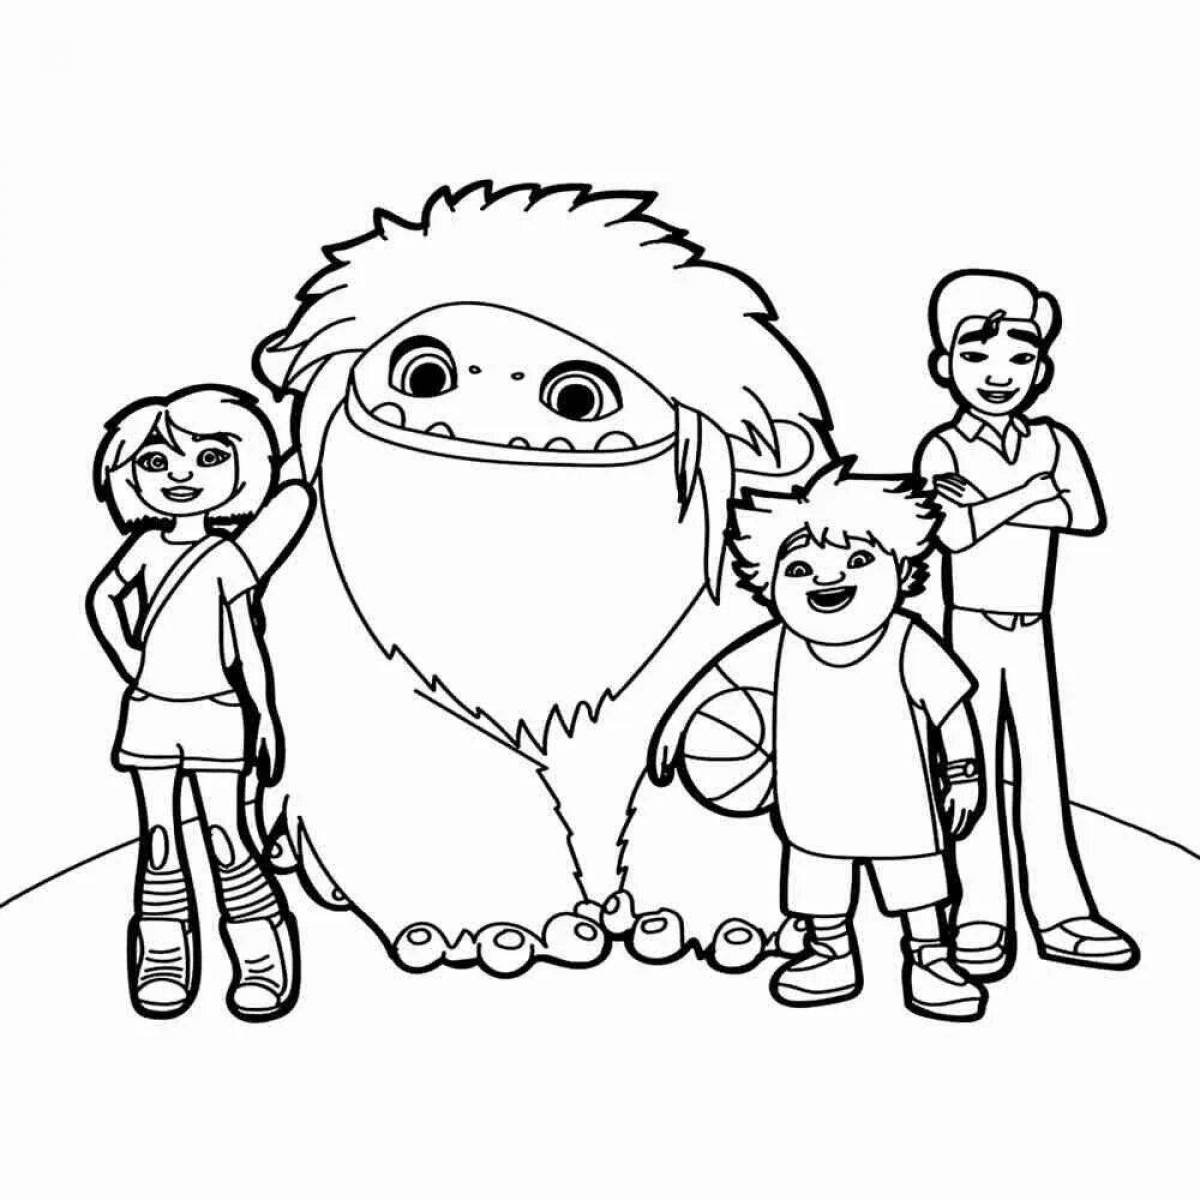 Attractive brownie date coloring page